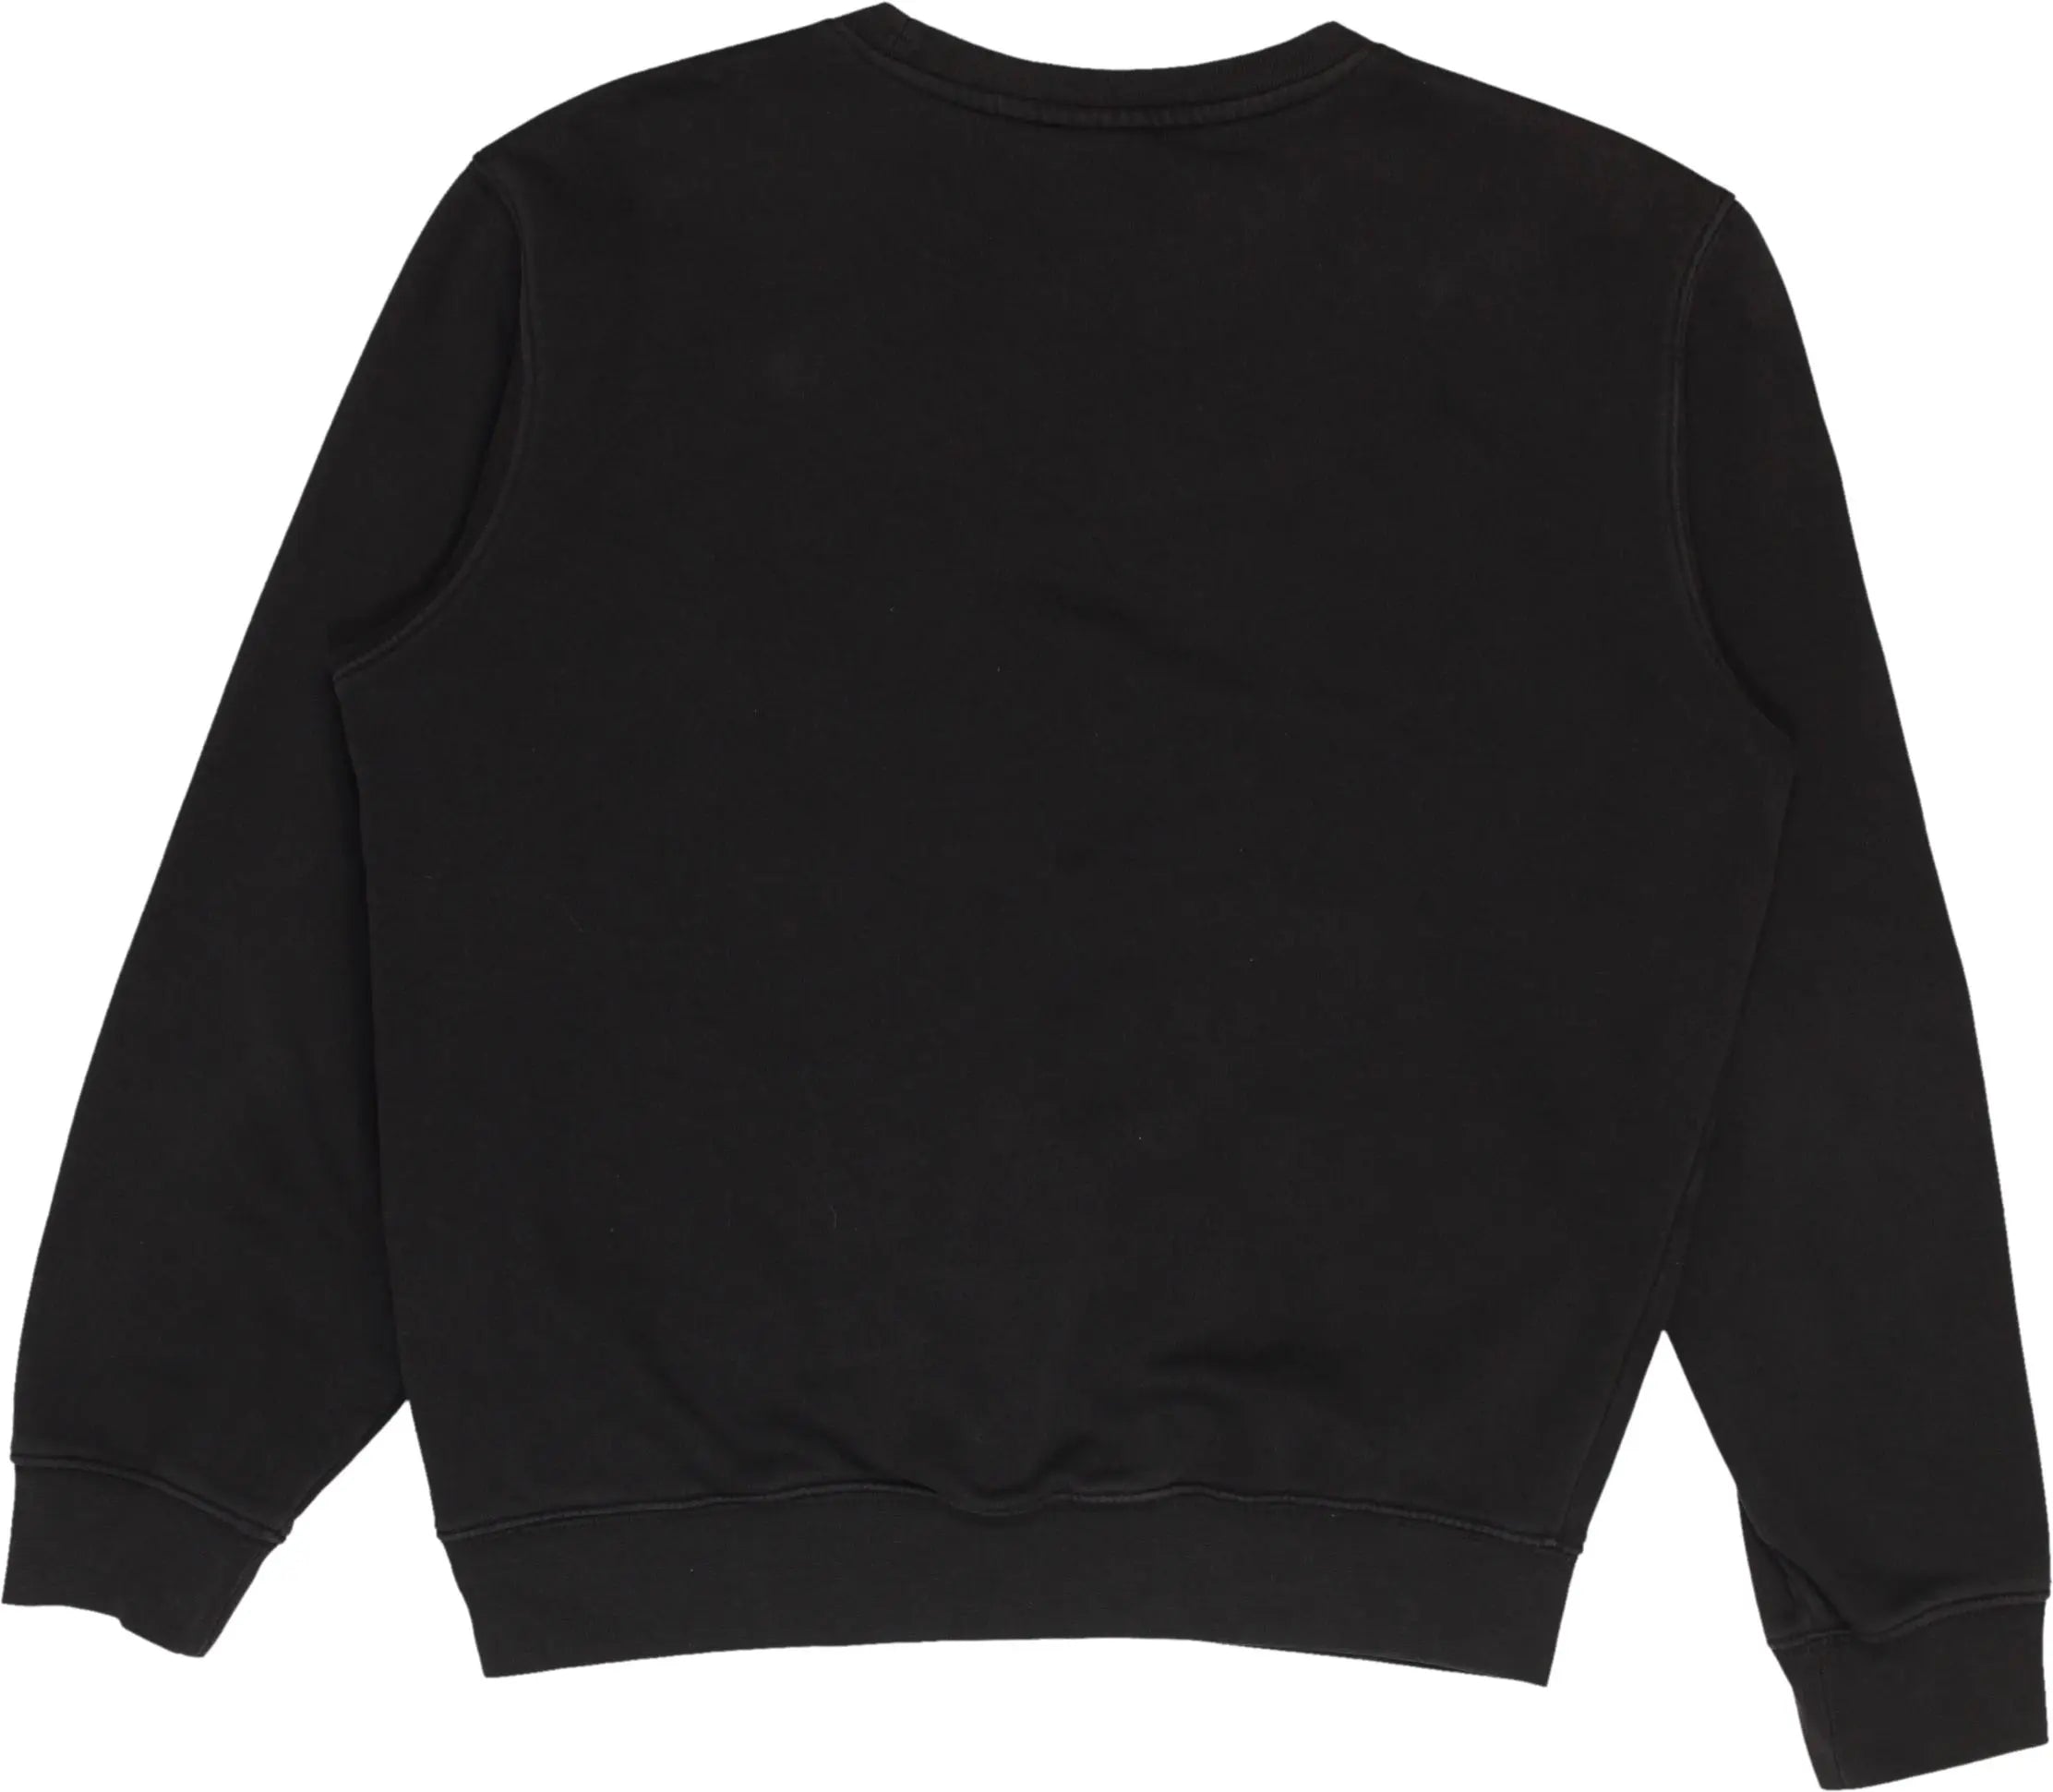 Champion - Black Champion sweater- ThriftTale.com - Vintage and second handclothing